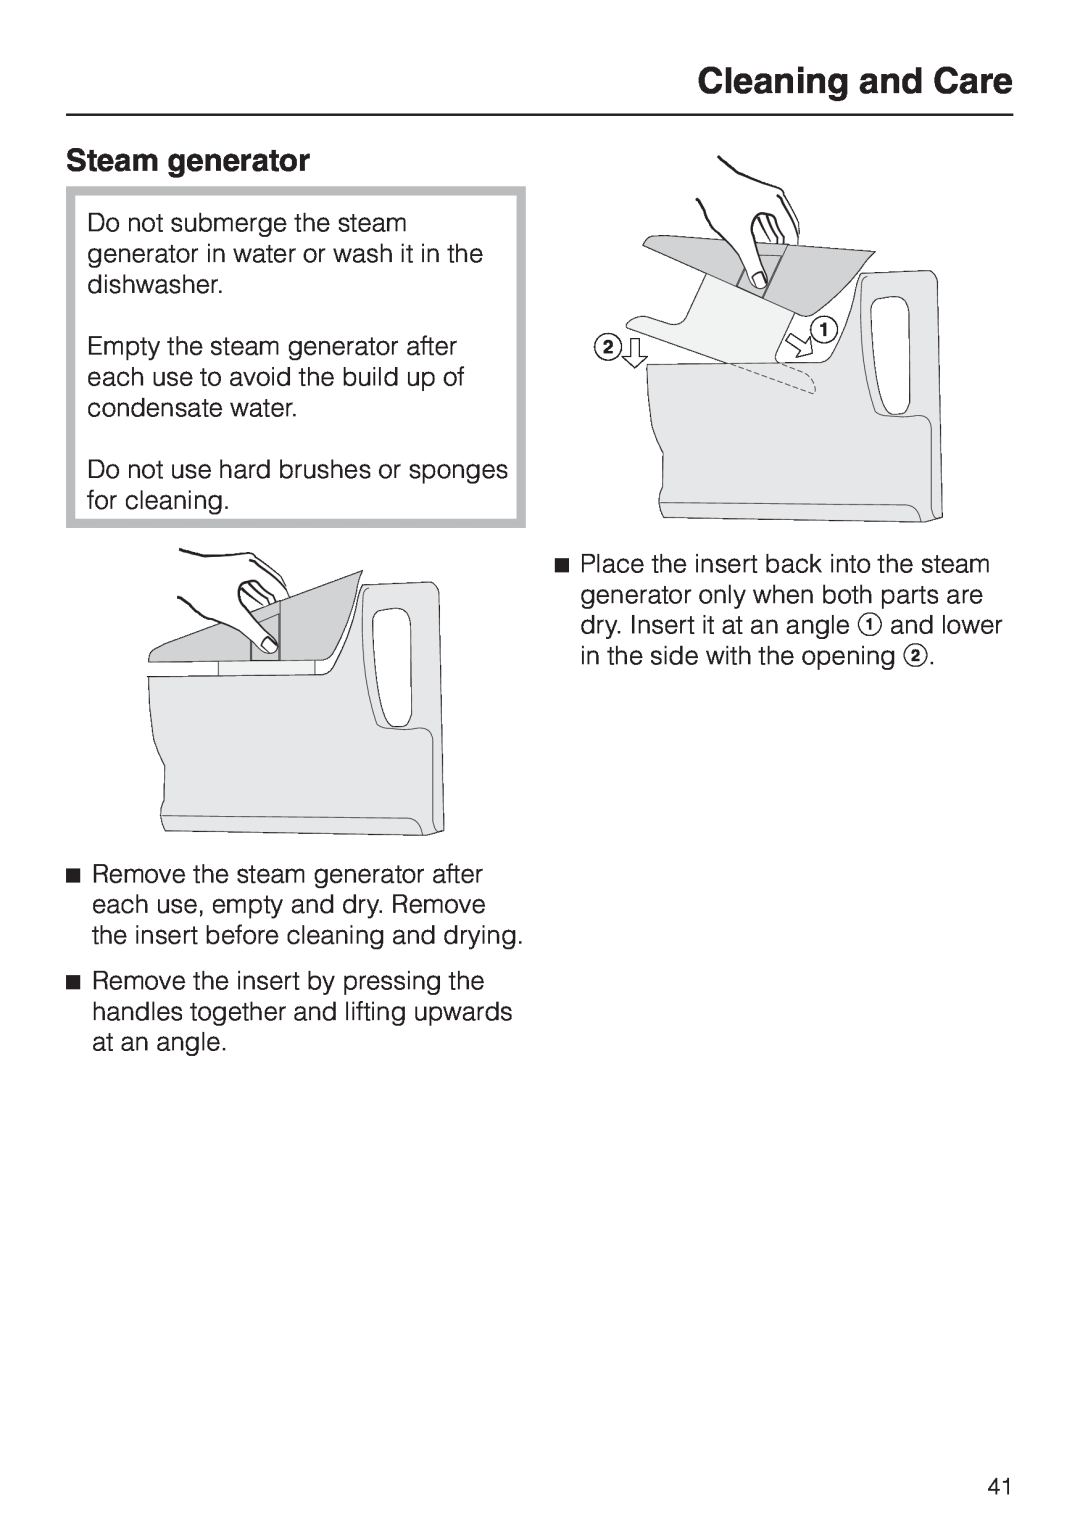 Miele DG 2661 installation instructions Steam generator, Cleaning and Care 